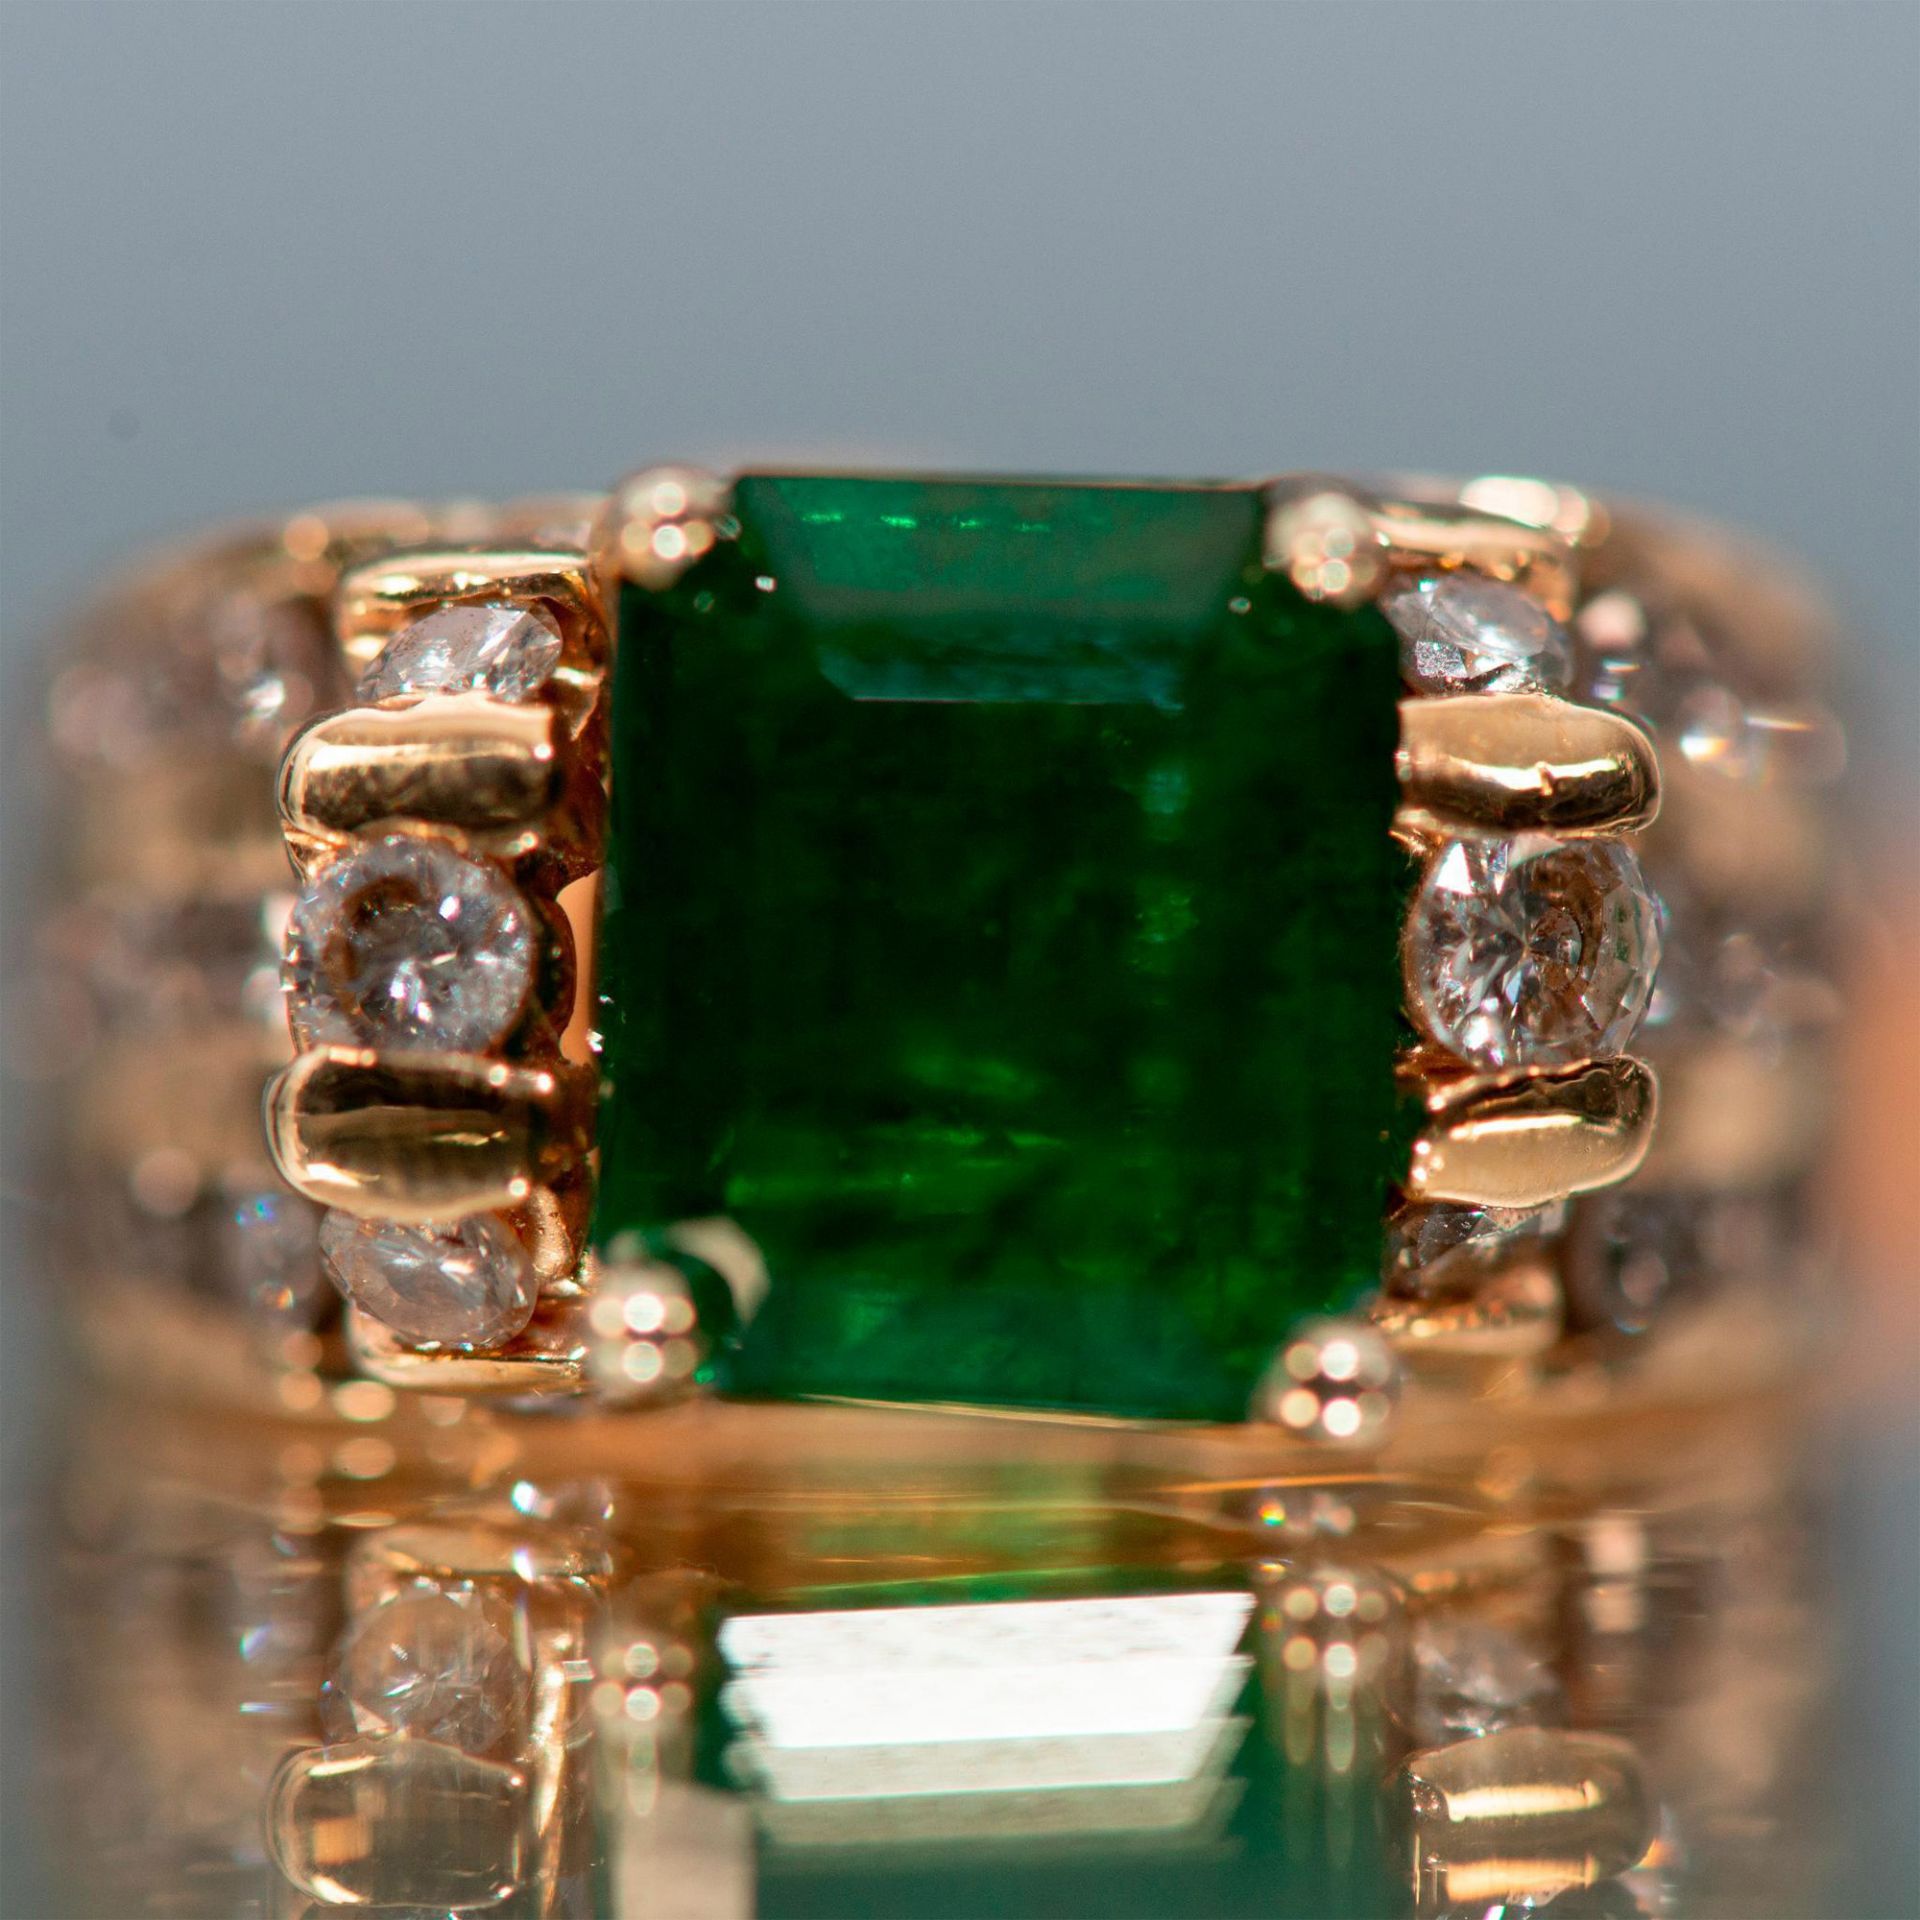 Luxurious Emerald and Diamonds 14K Yellow Gold Ring - Image 5 of 8